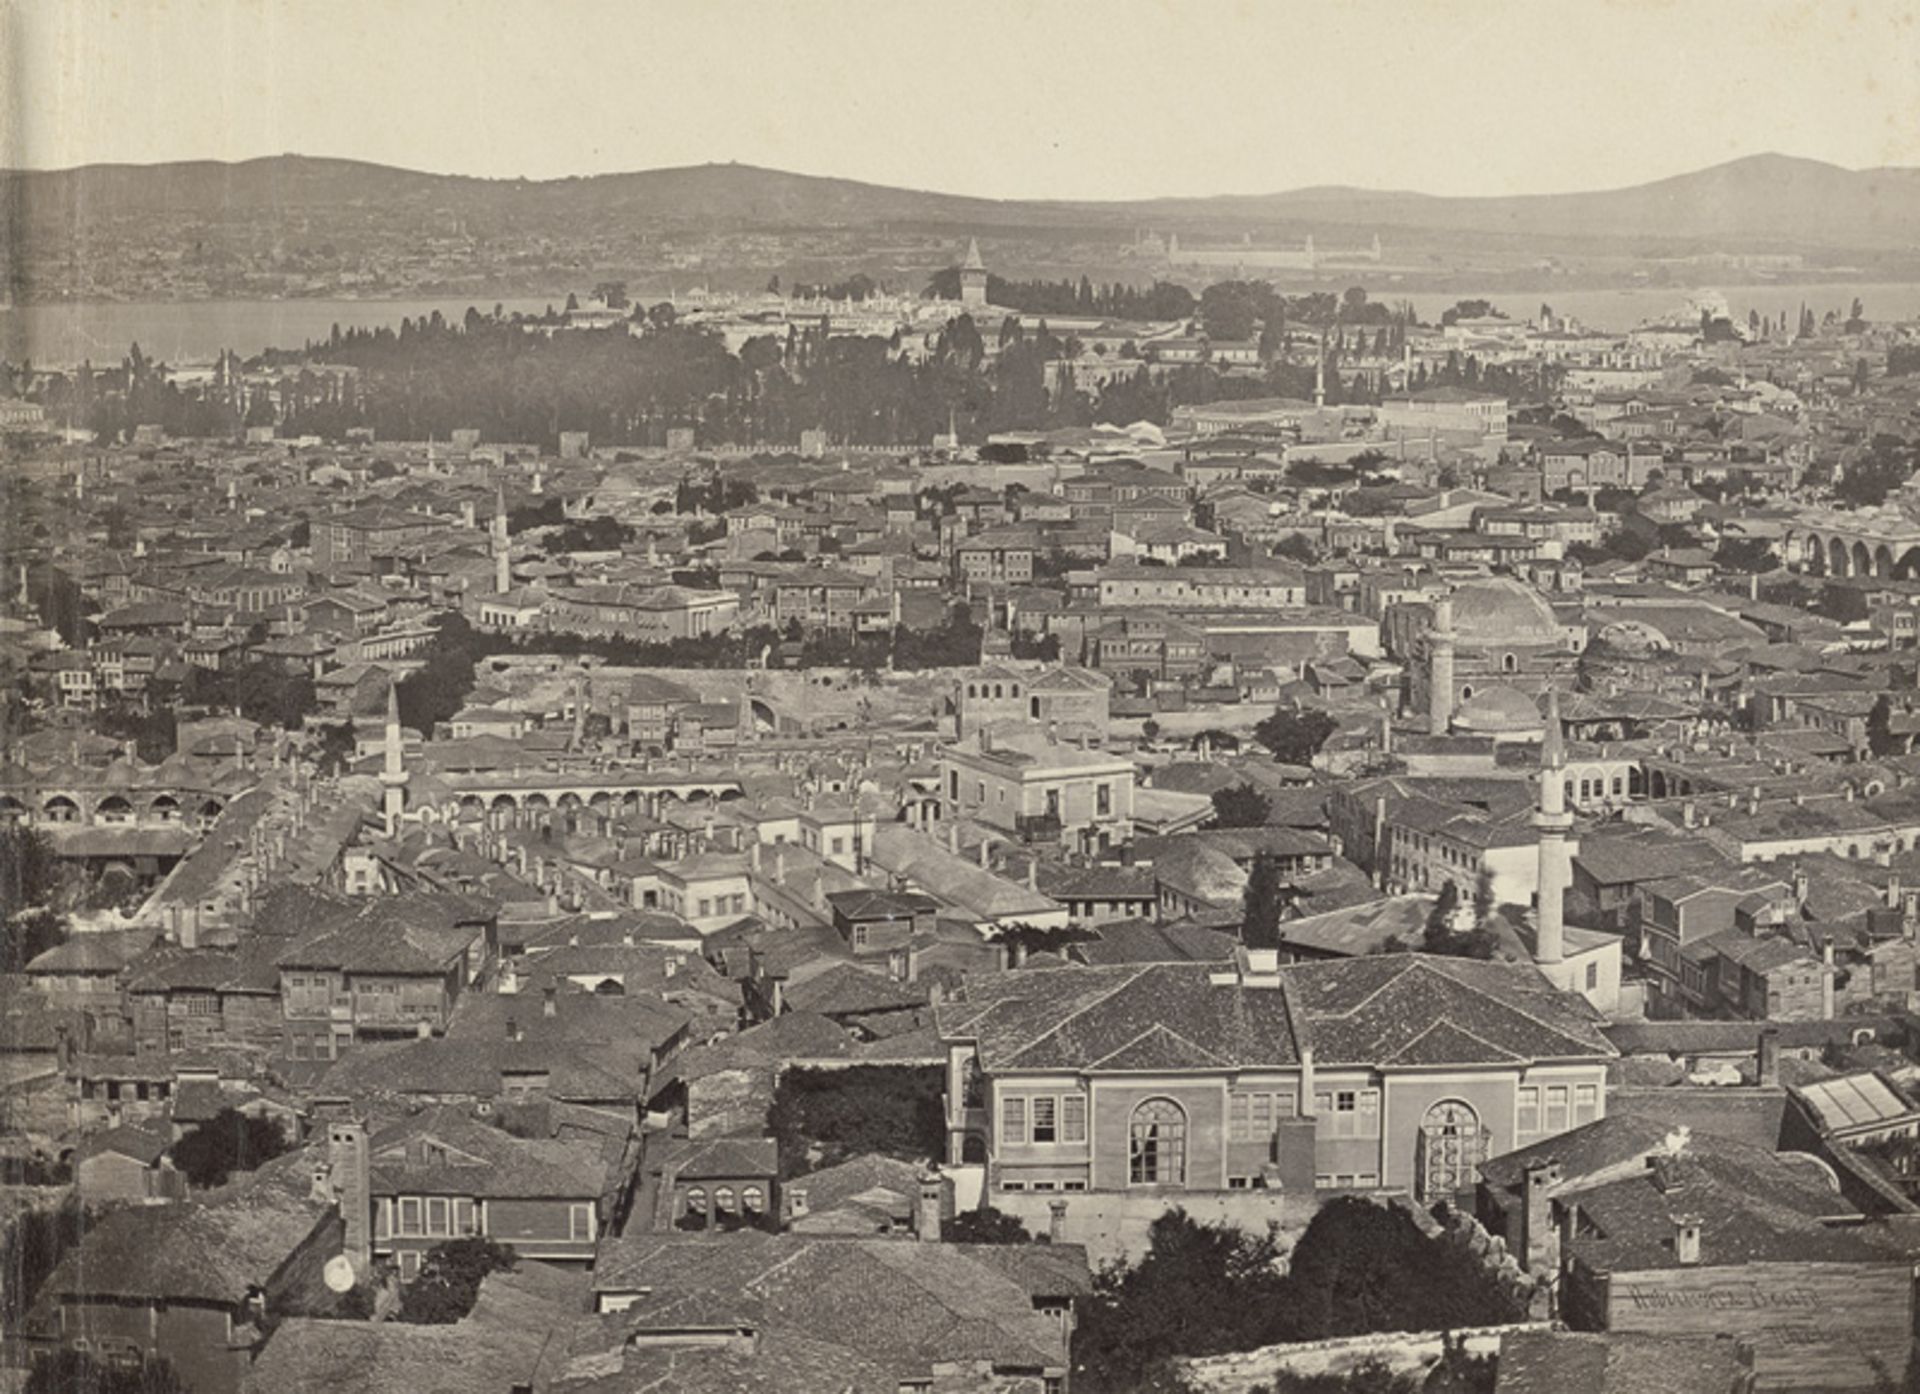 Robertson, James and Felice Beato: Panorama of Constantinople - Image 5 of 6